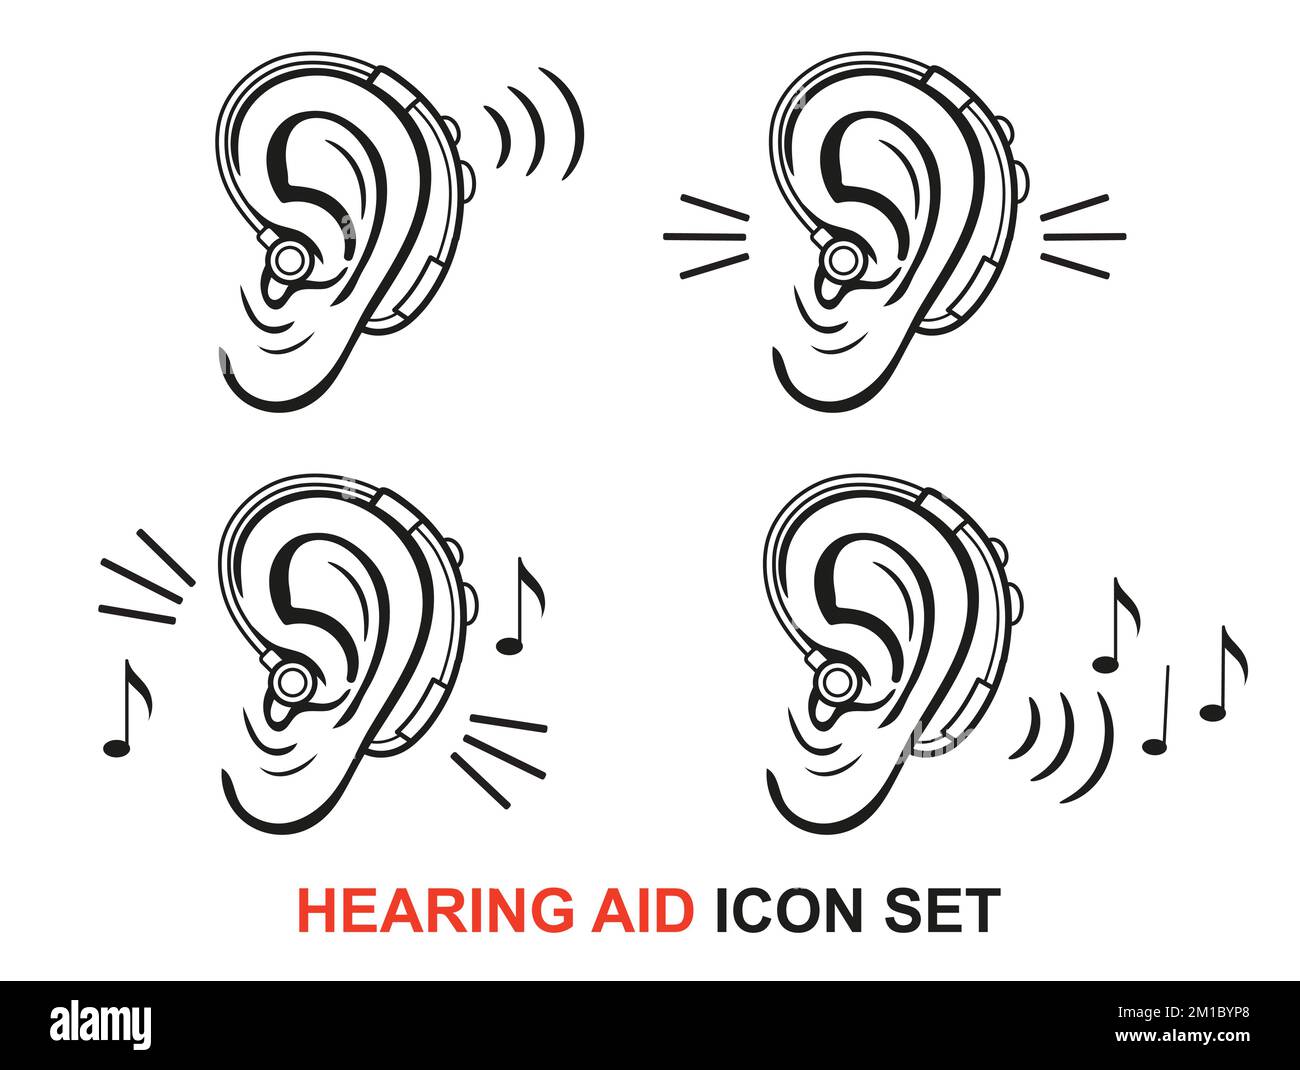 Ear hearing aid for deaf, hear loss, medical auditory device, deafness treatment line icon set. Human sound perception tool. Listen impairment. Vector Stock Vector